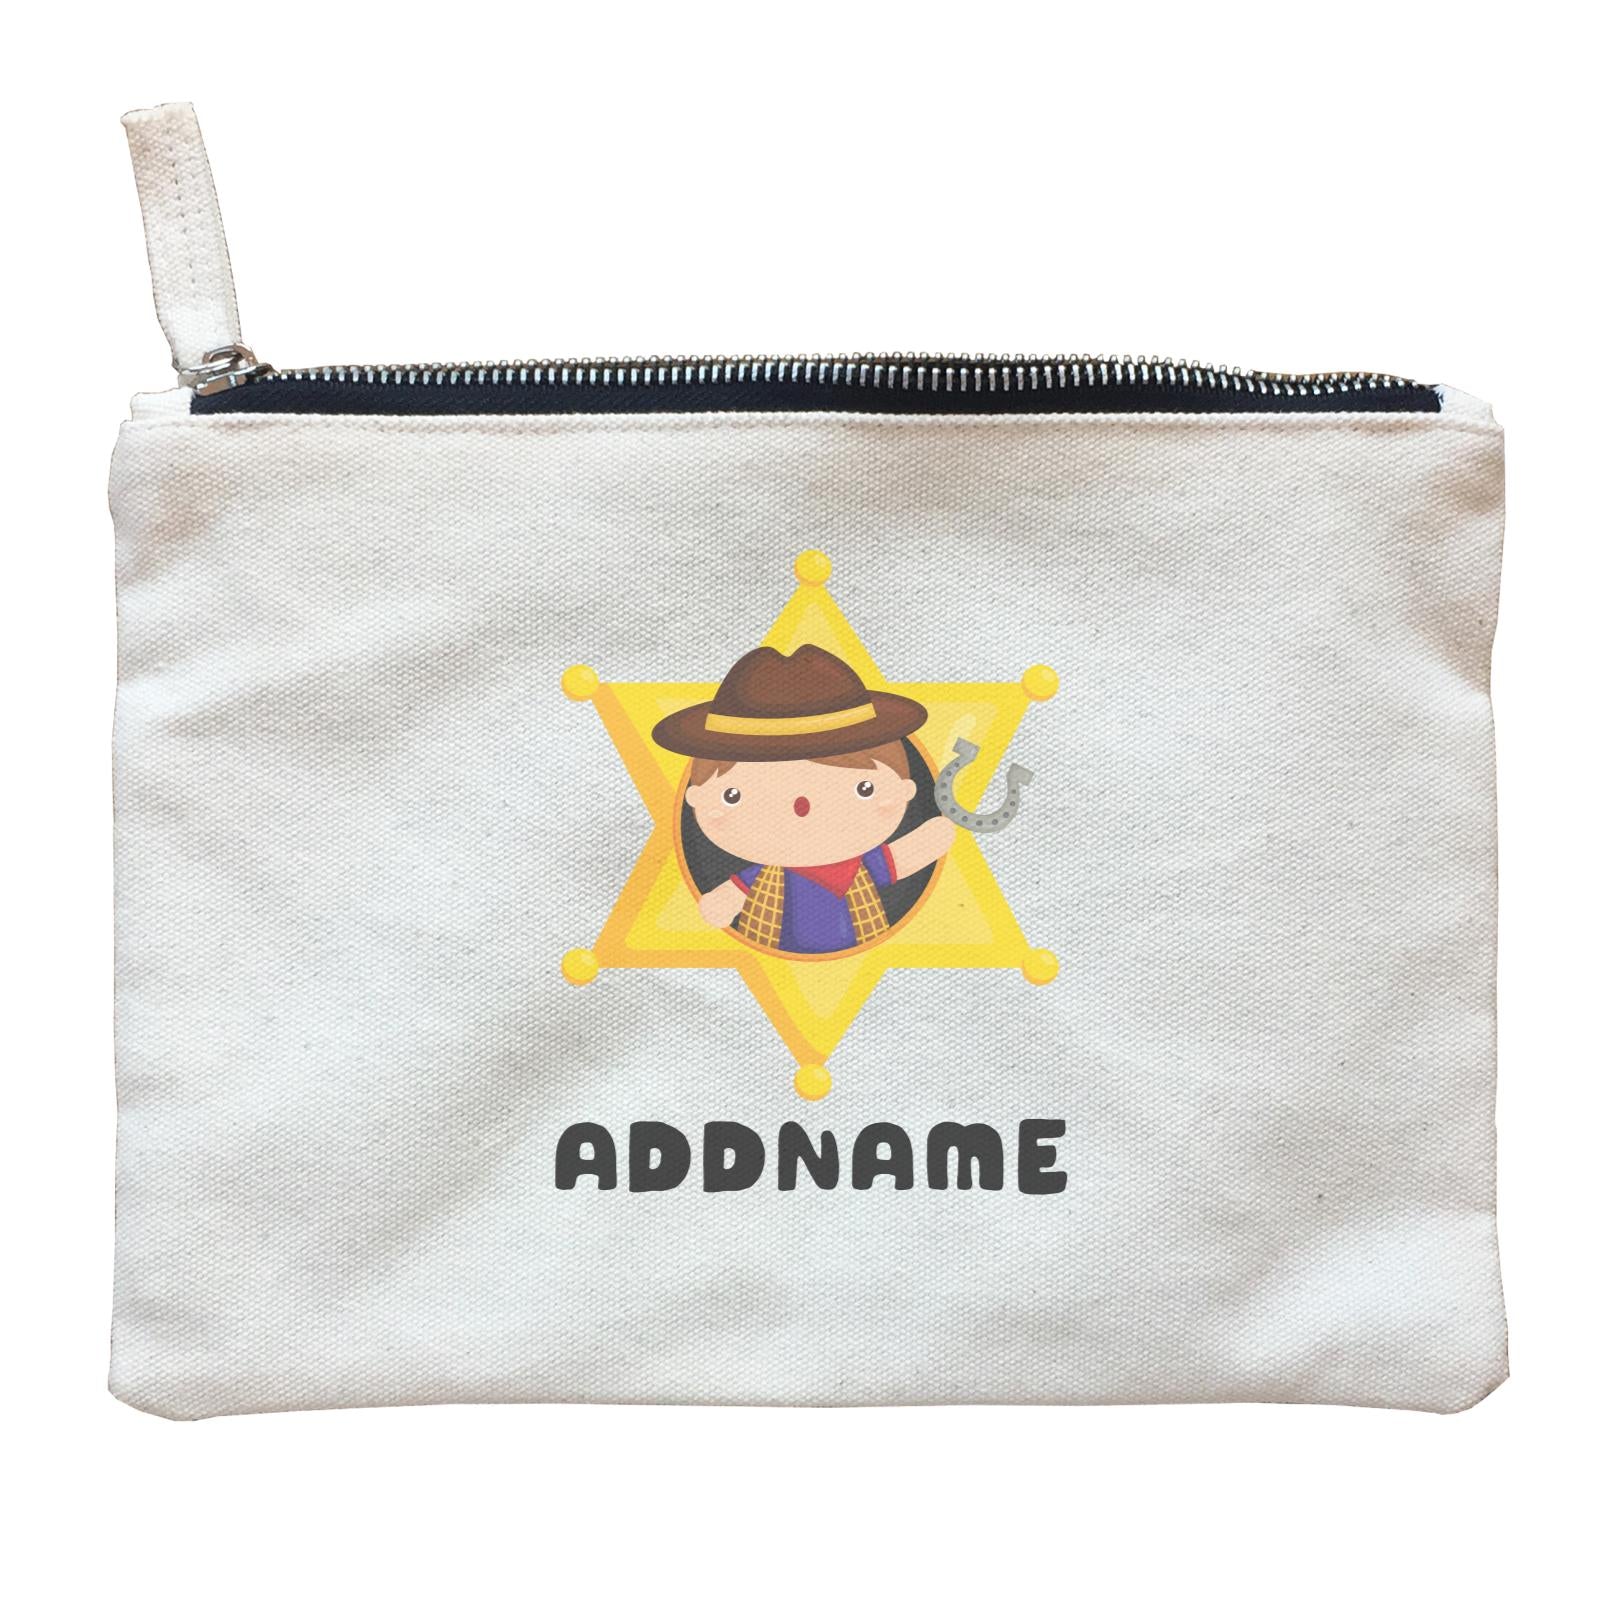 Birthday Cowboy Style Little Cowboy Holding Hoe In Star Badge Addname Zipper Pouch